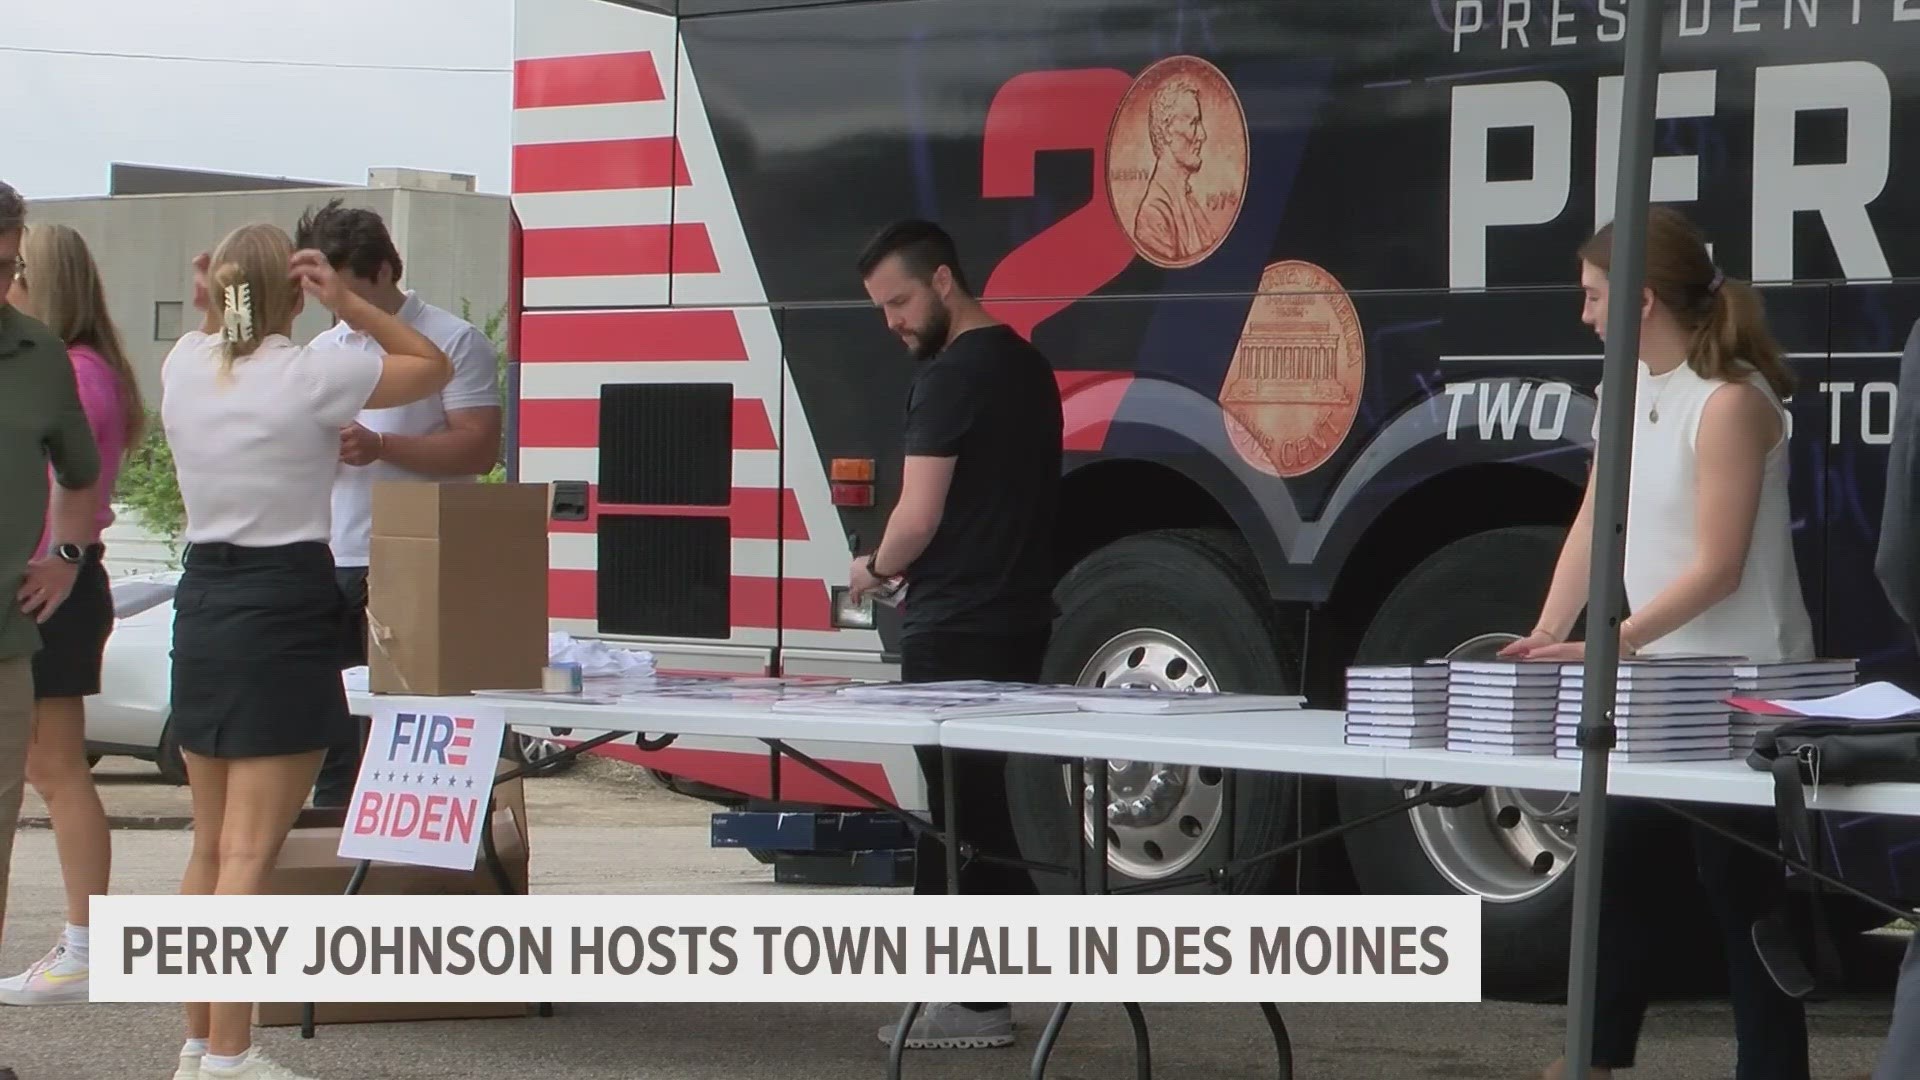 Republican candidate Perry Johnson is in Iowa this evening, hosting his first official town hall in Des Moines since announcing his presidential run.